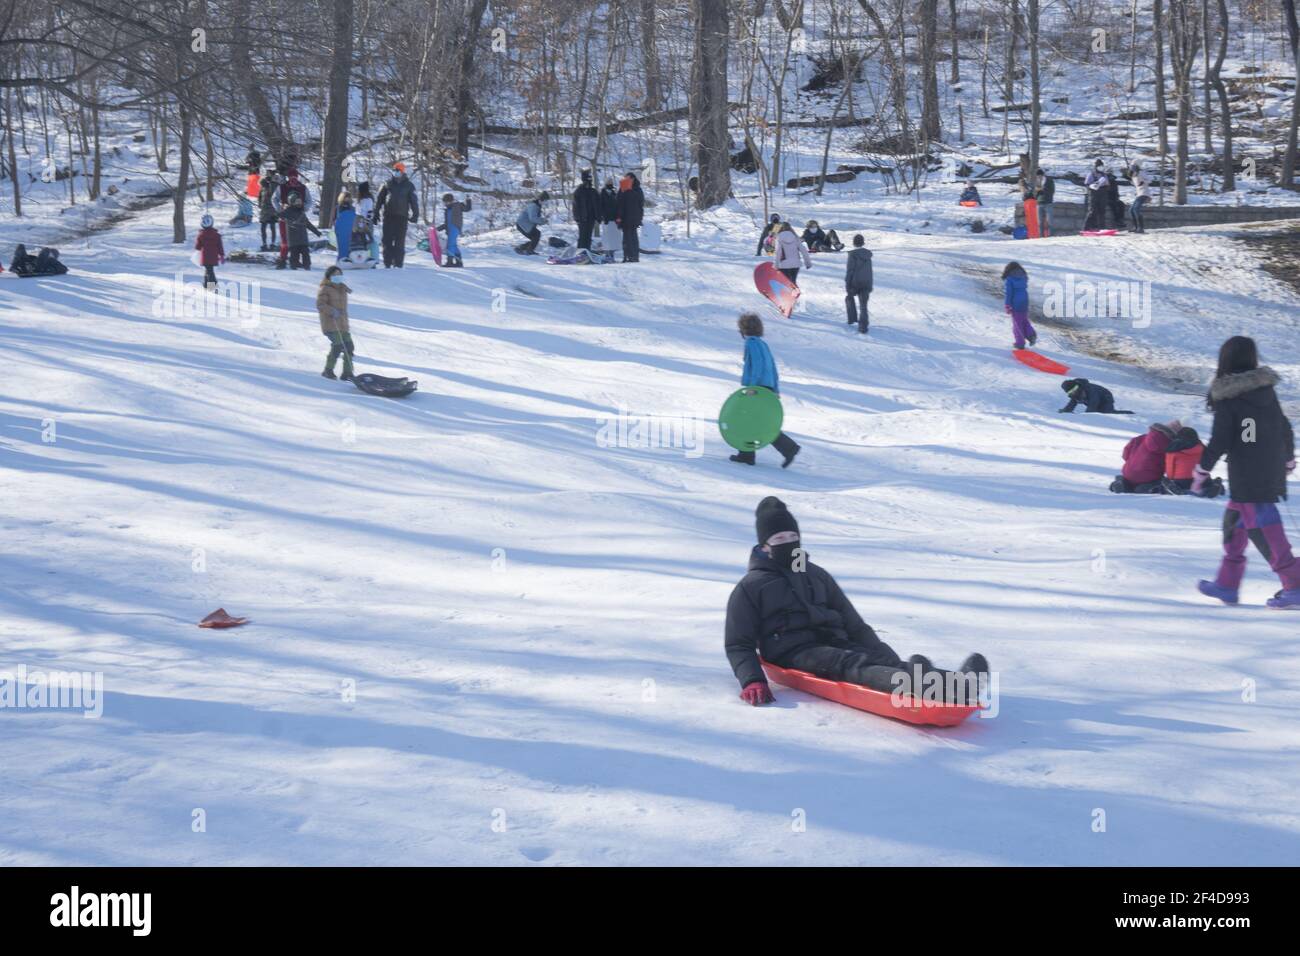 Children and families enjoying a day sledding in Prospect Park after a recent winter snow storm in Brooklyn, New York. Stock Photo